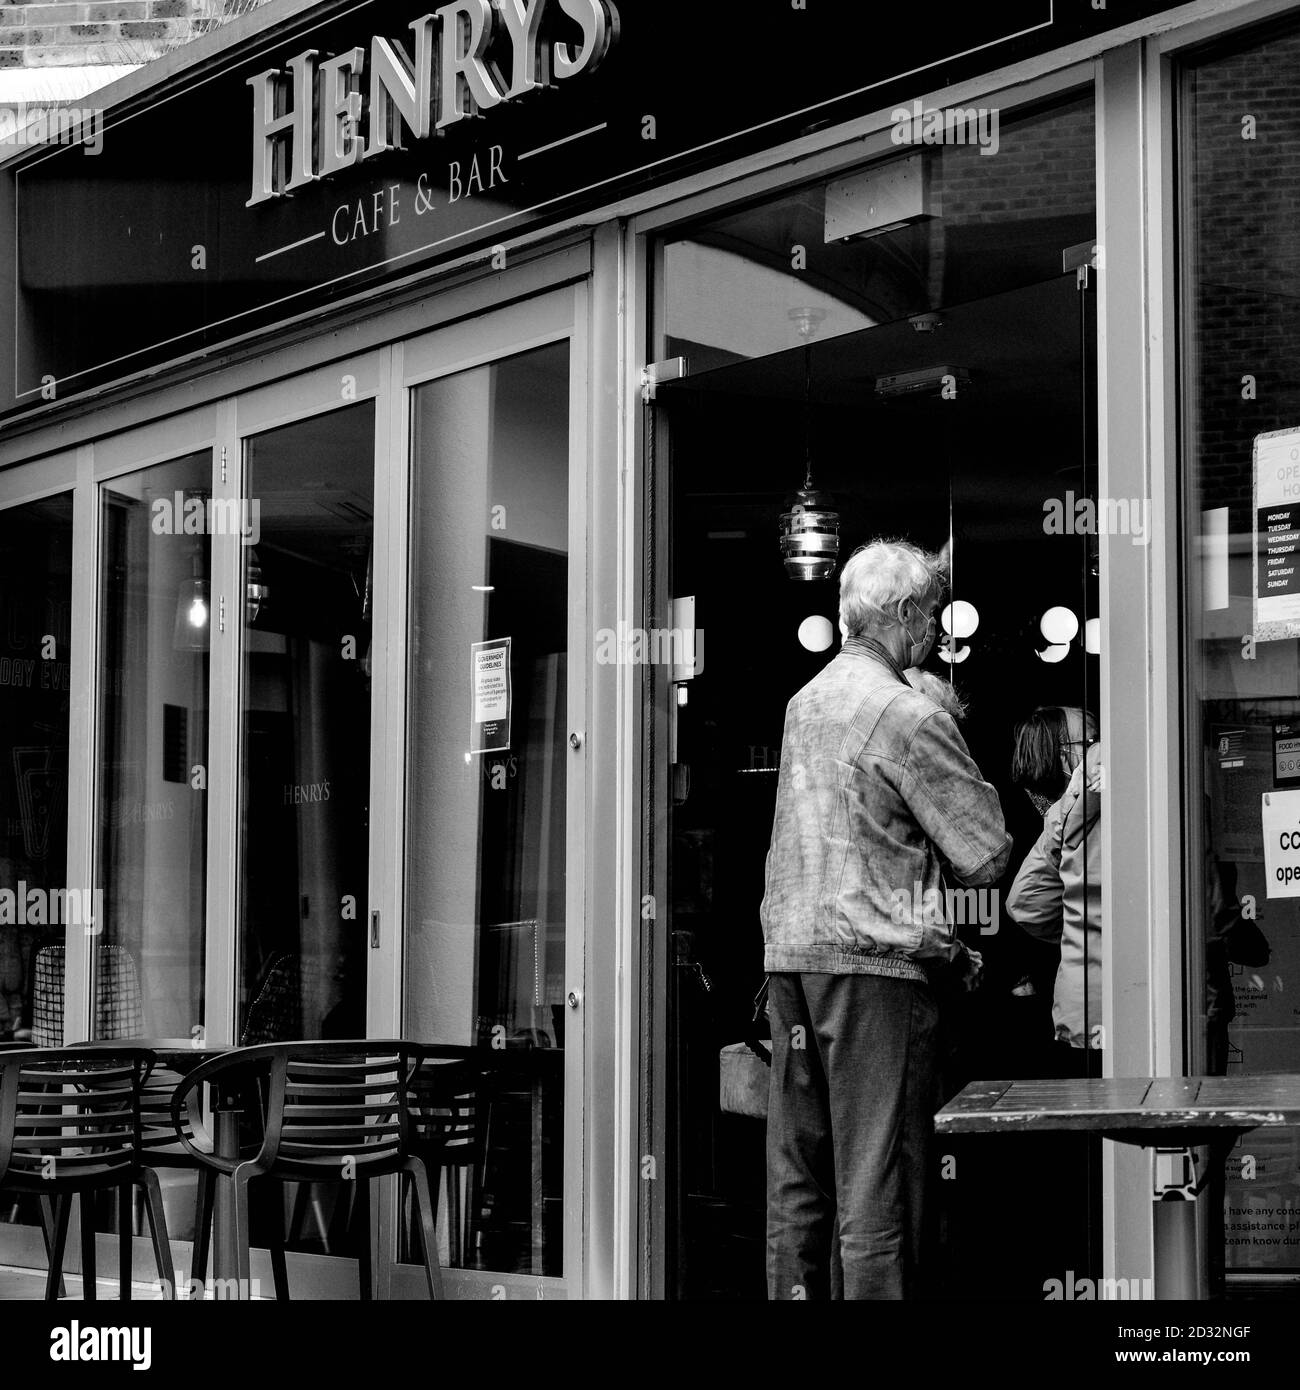 London UK October 06 2020, Elderly Man Queuing To Enter A High Street Restaurant During Easing Of COVID-19 Lockdown Restrictions Stock Photo